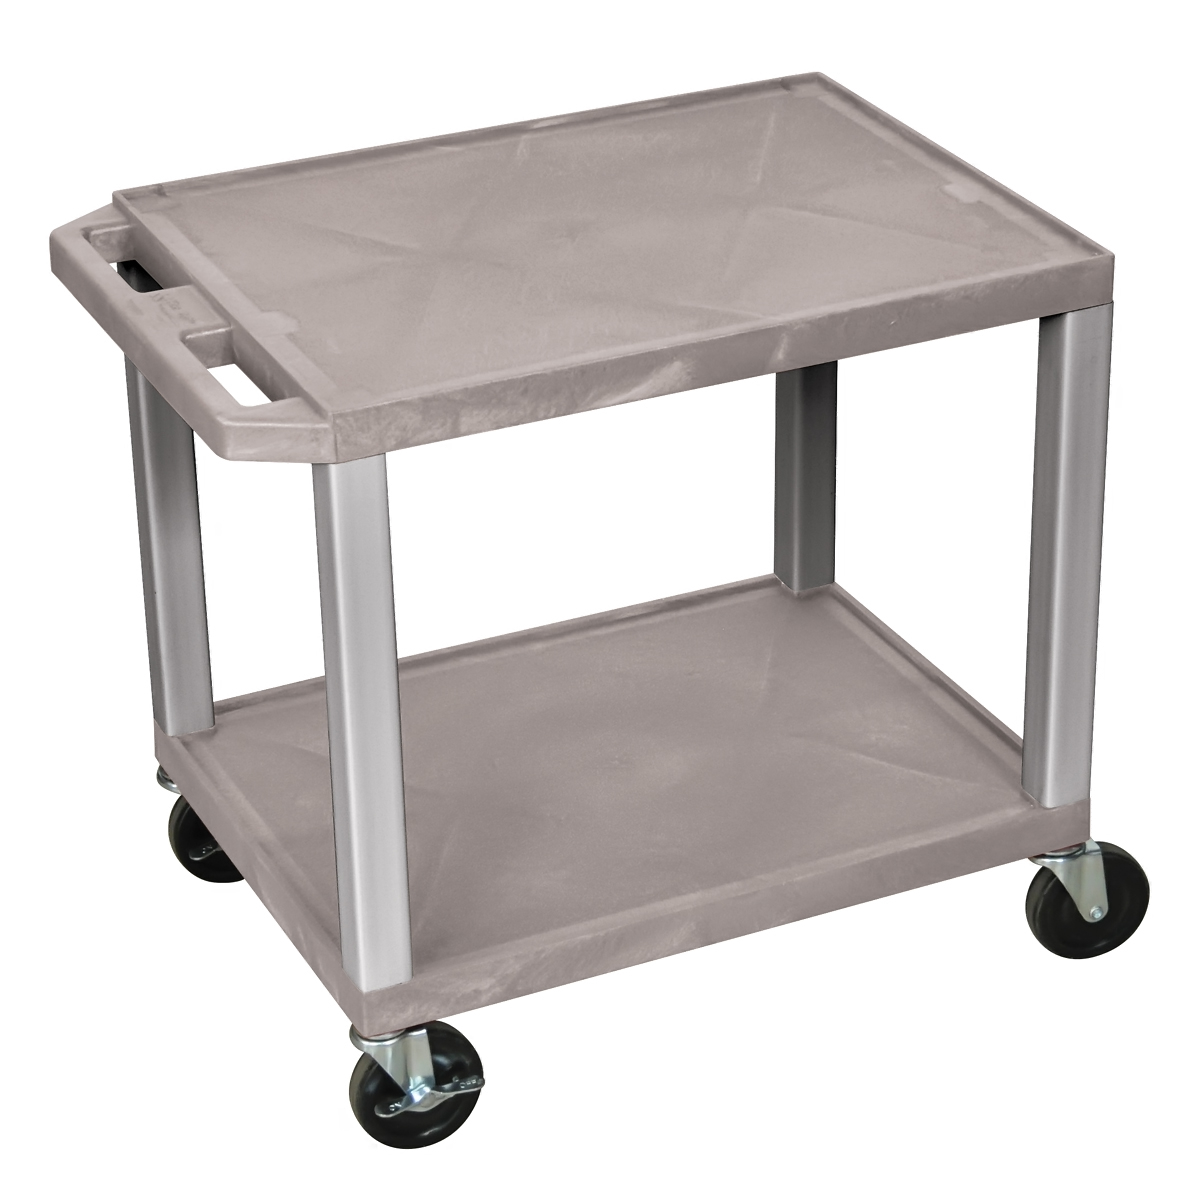 Offex Of-wt26gy Multipurpose Utility A/v Cart - 2 Shelves - Gray